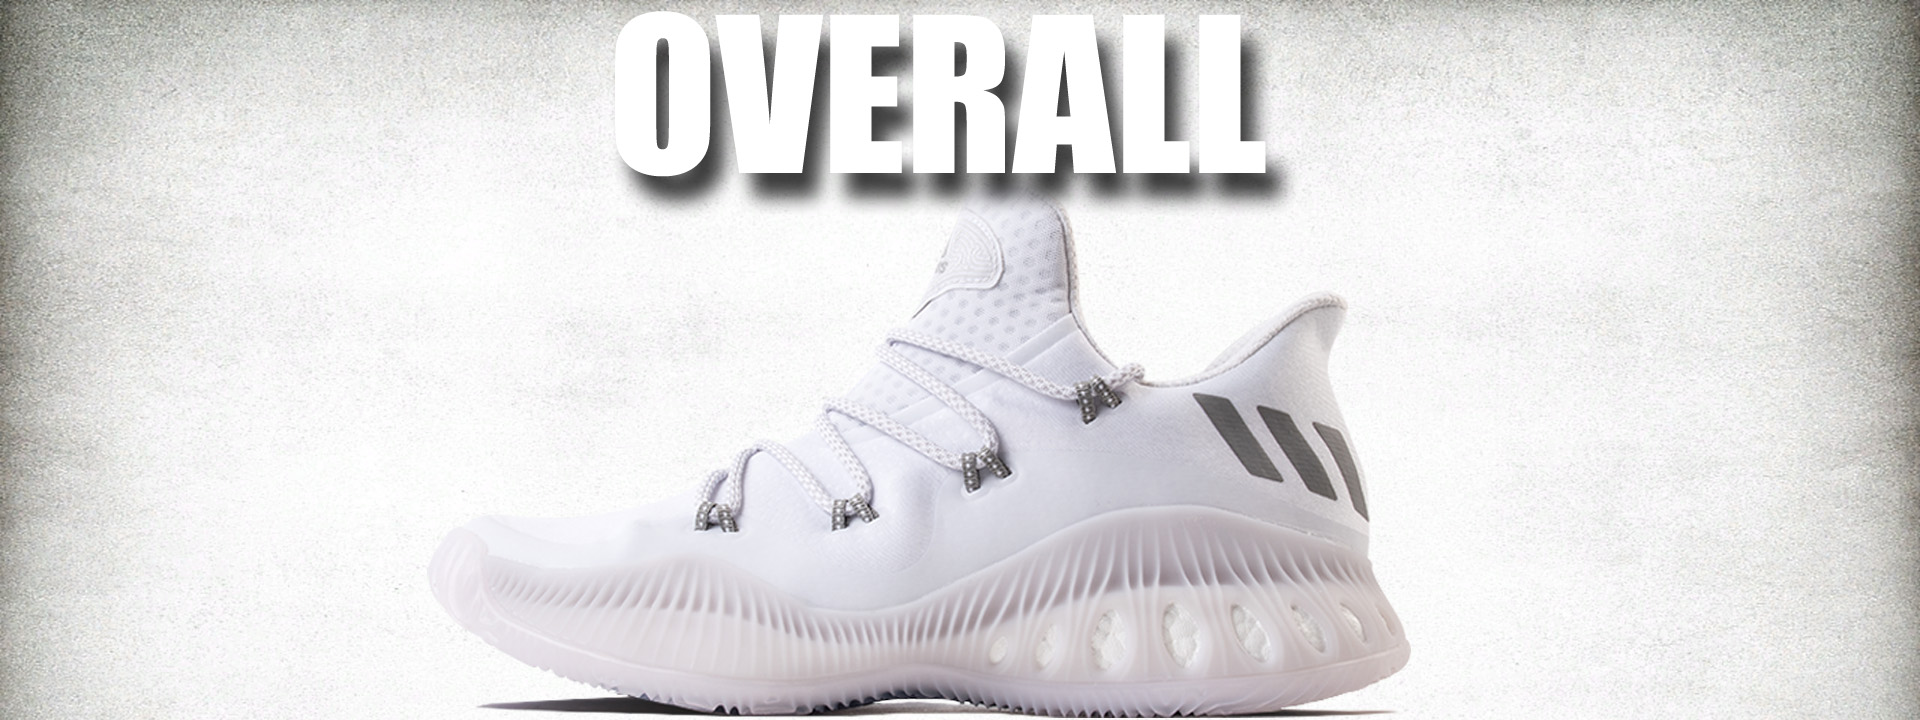 adidas Crazy Explosive Low Performance Review Overall